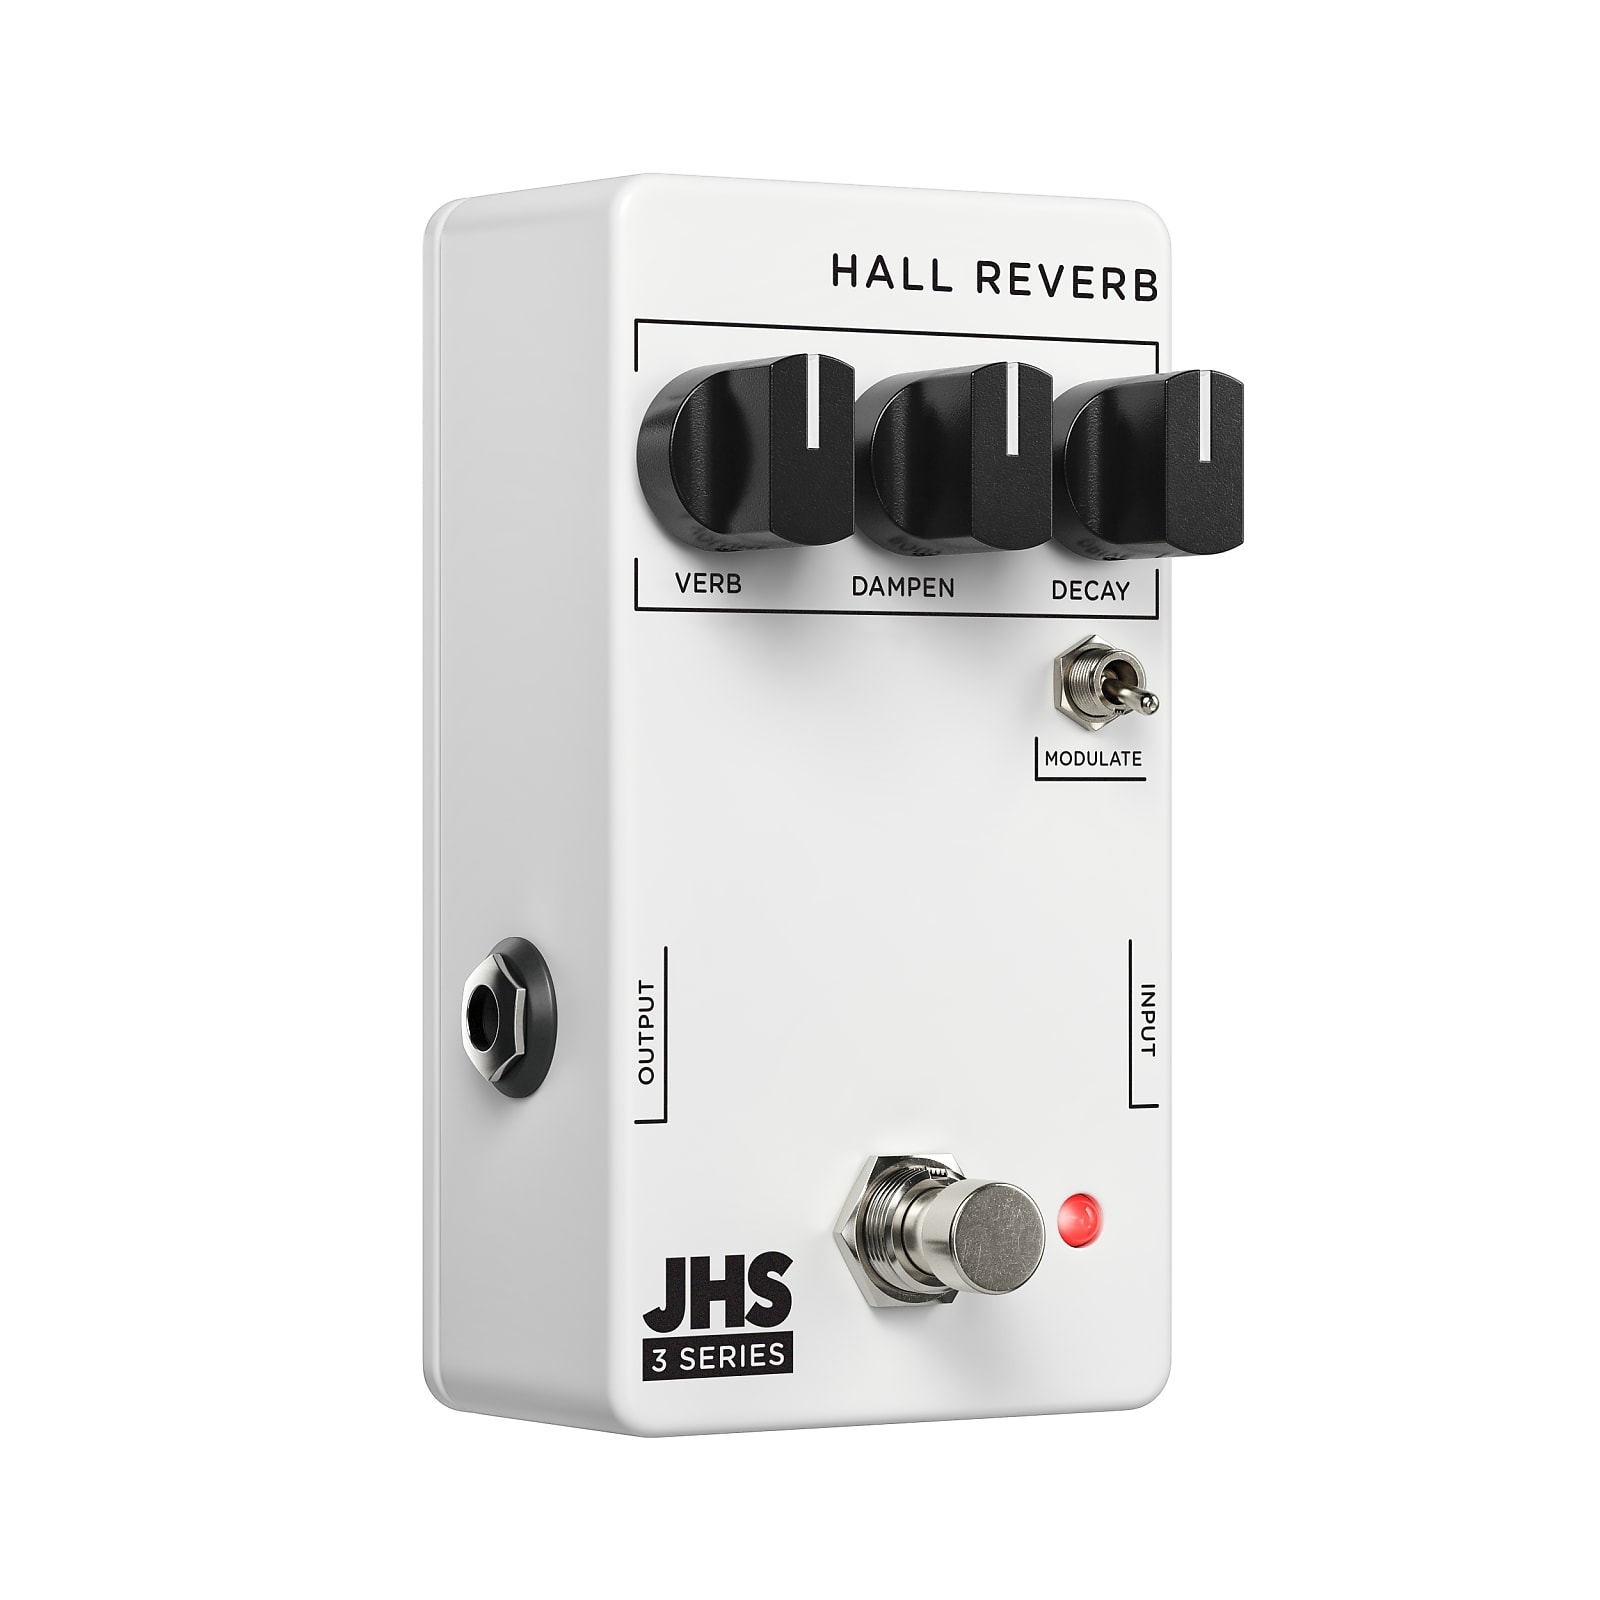 JHS 3 Series Hall Reverb Effects Pedal